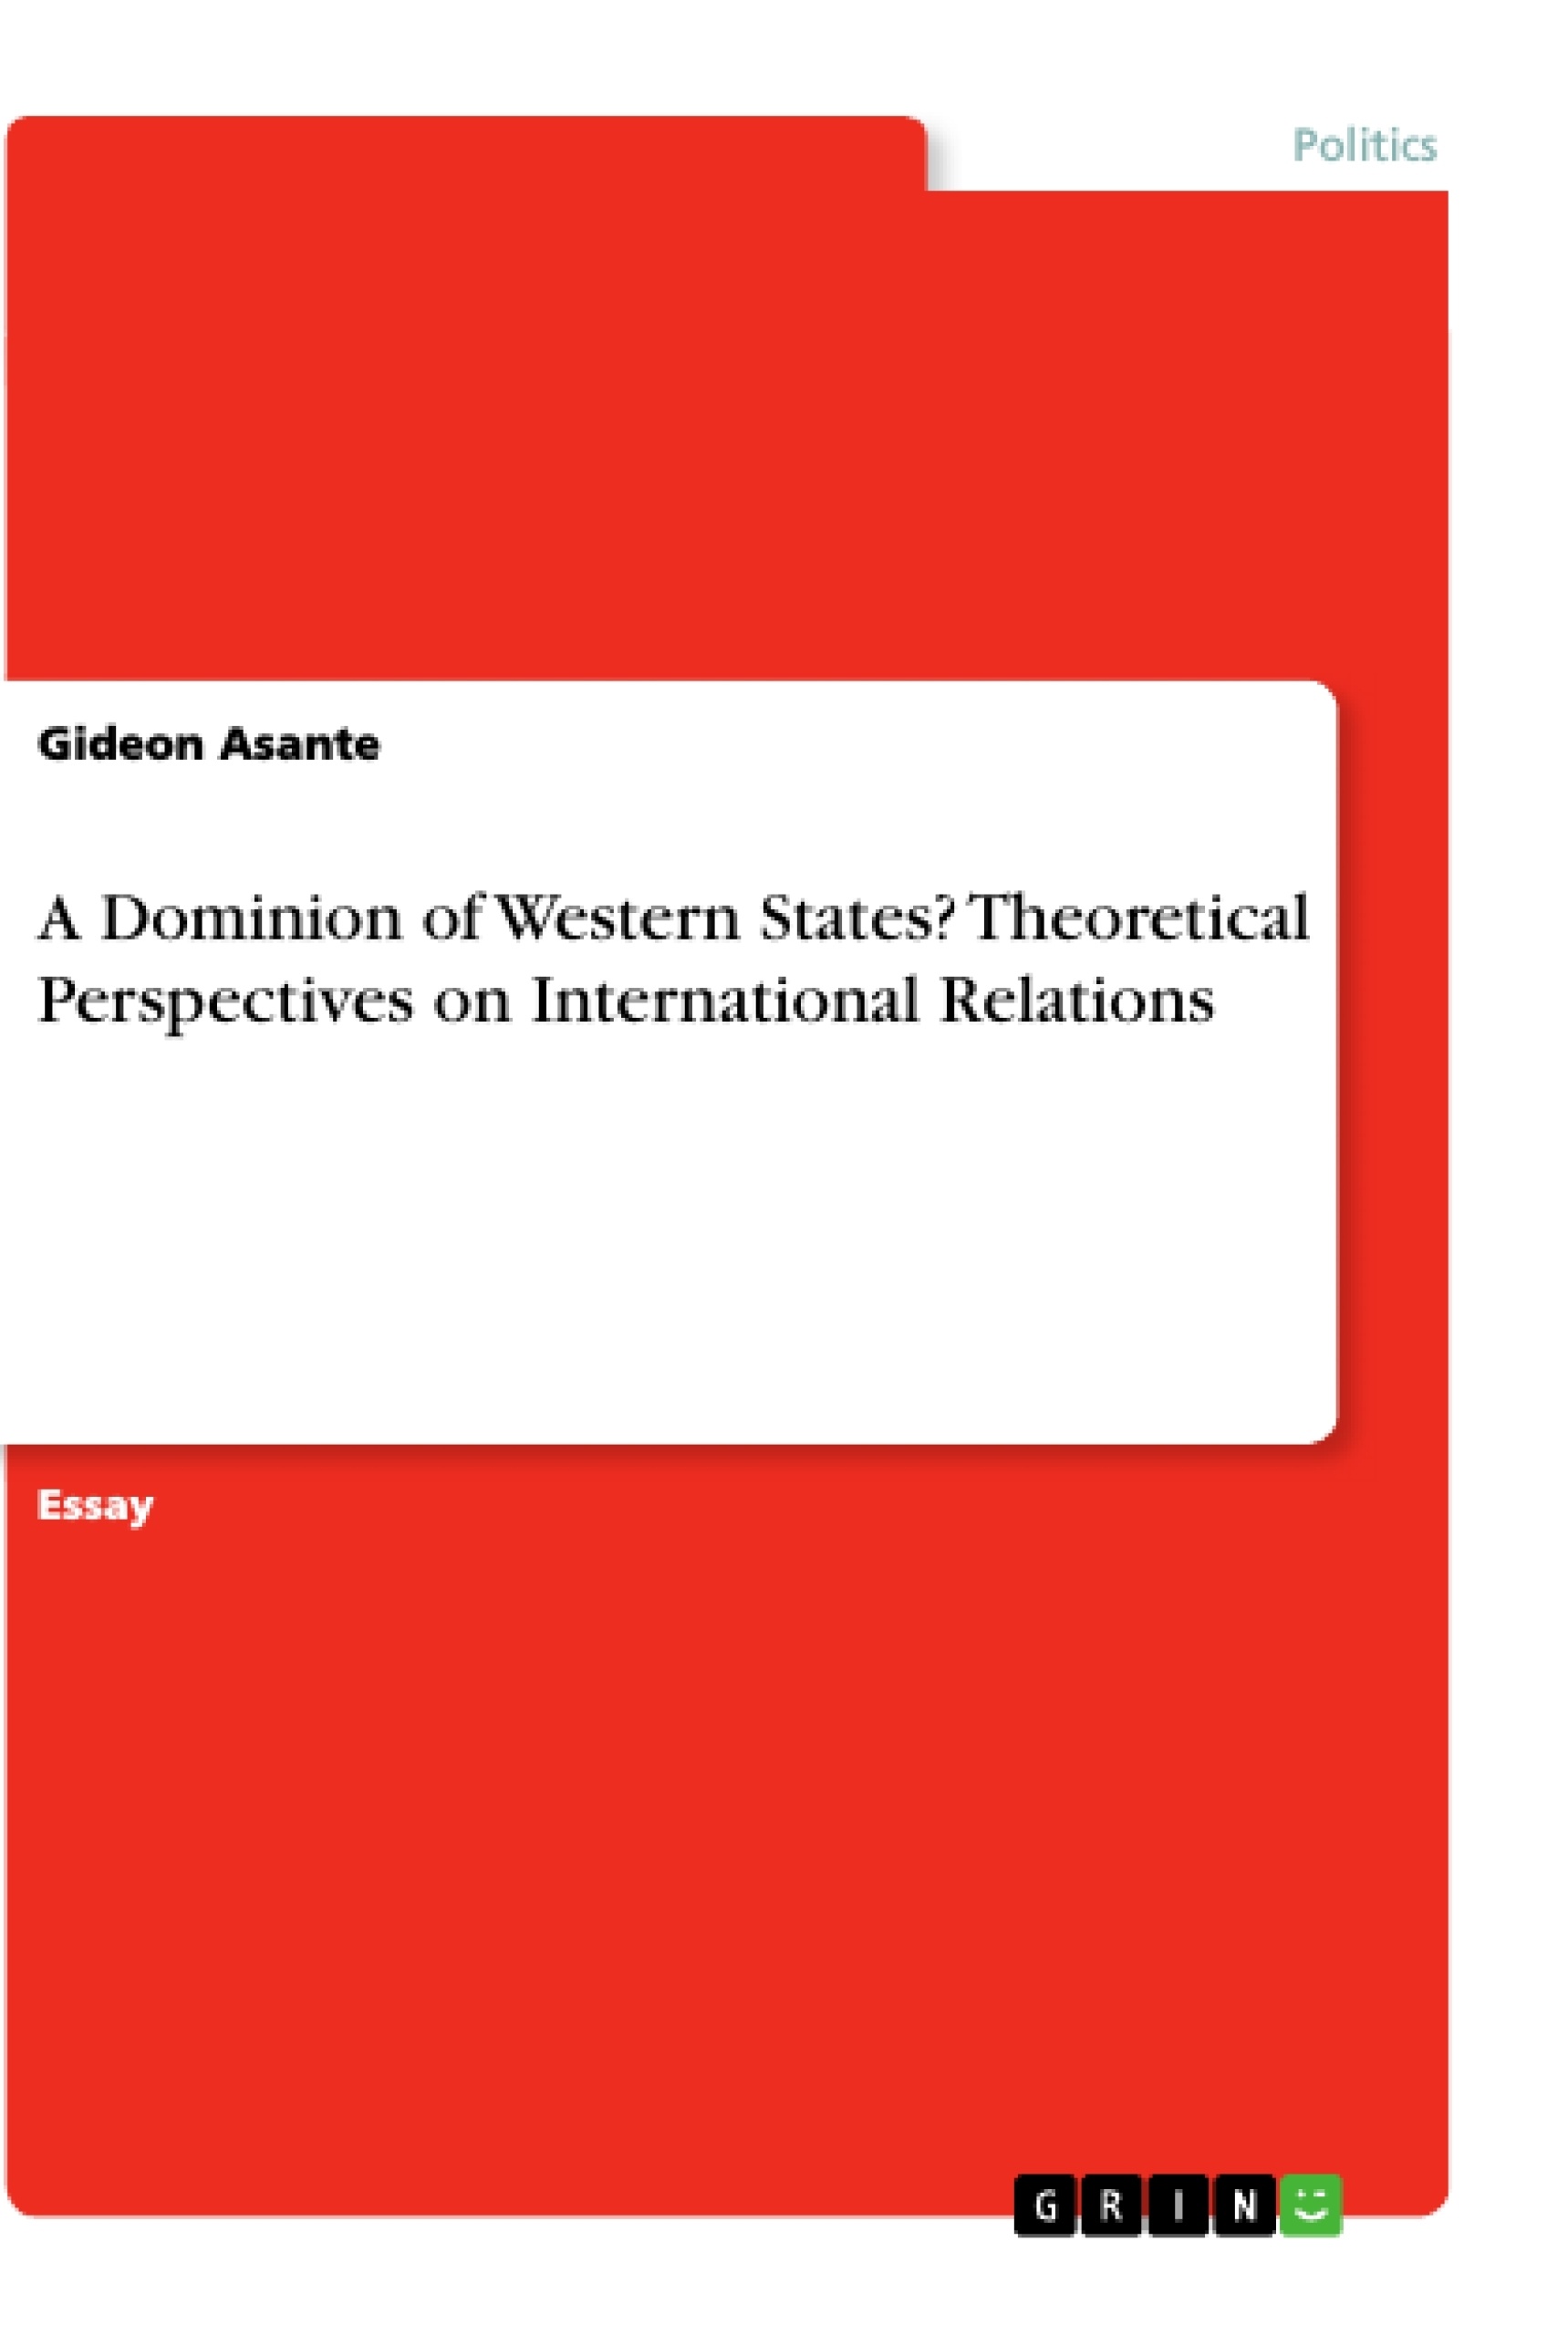 Title: A Dominion of Western States? Theoretical Perspectives on International Relations